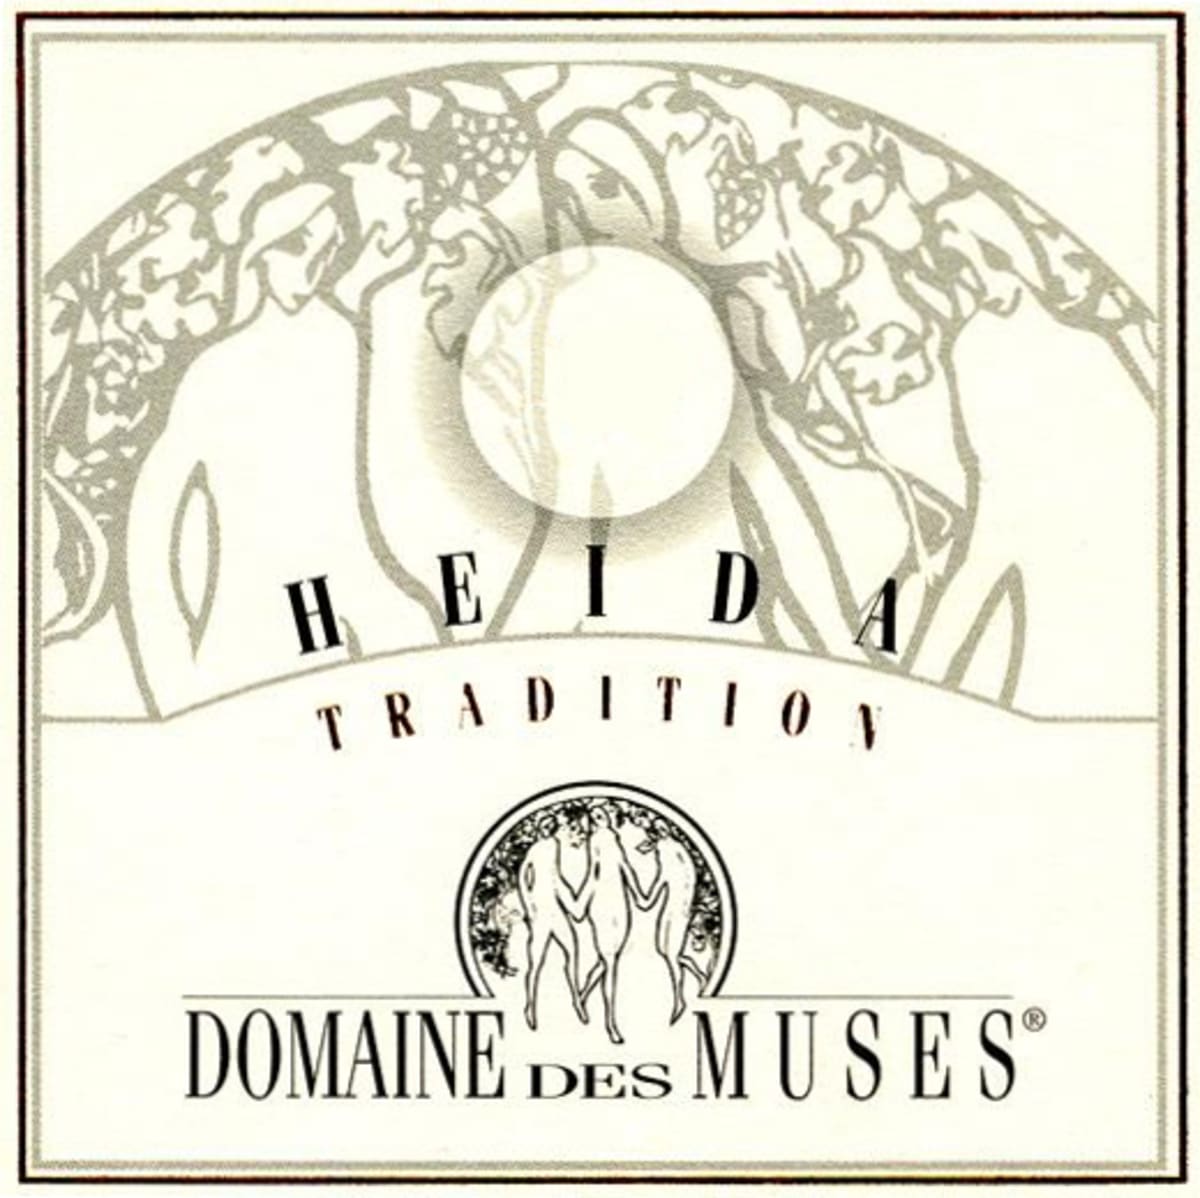 Domaine des Muses Heida Tradition 2011 Front Label